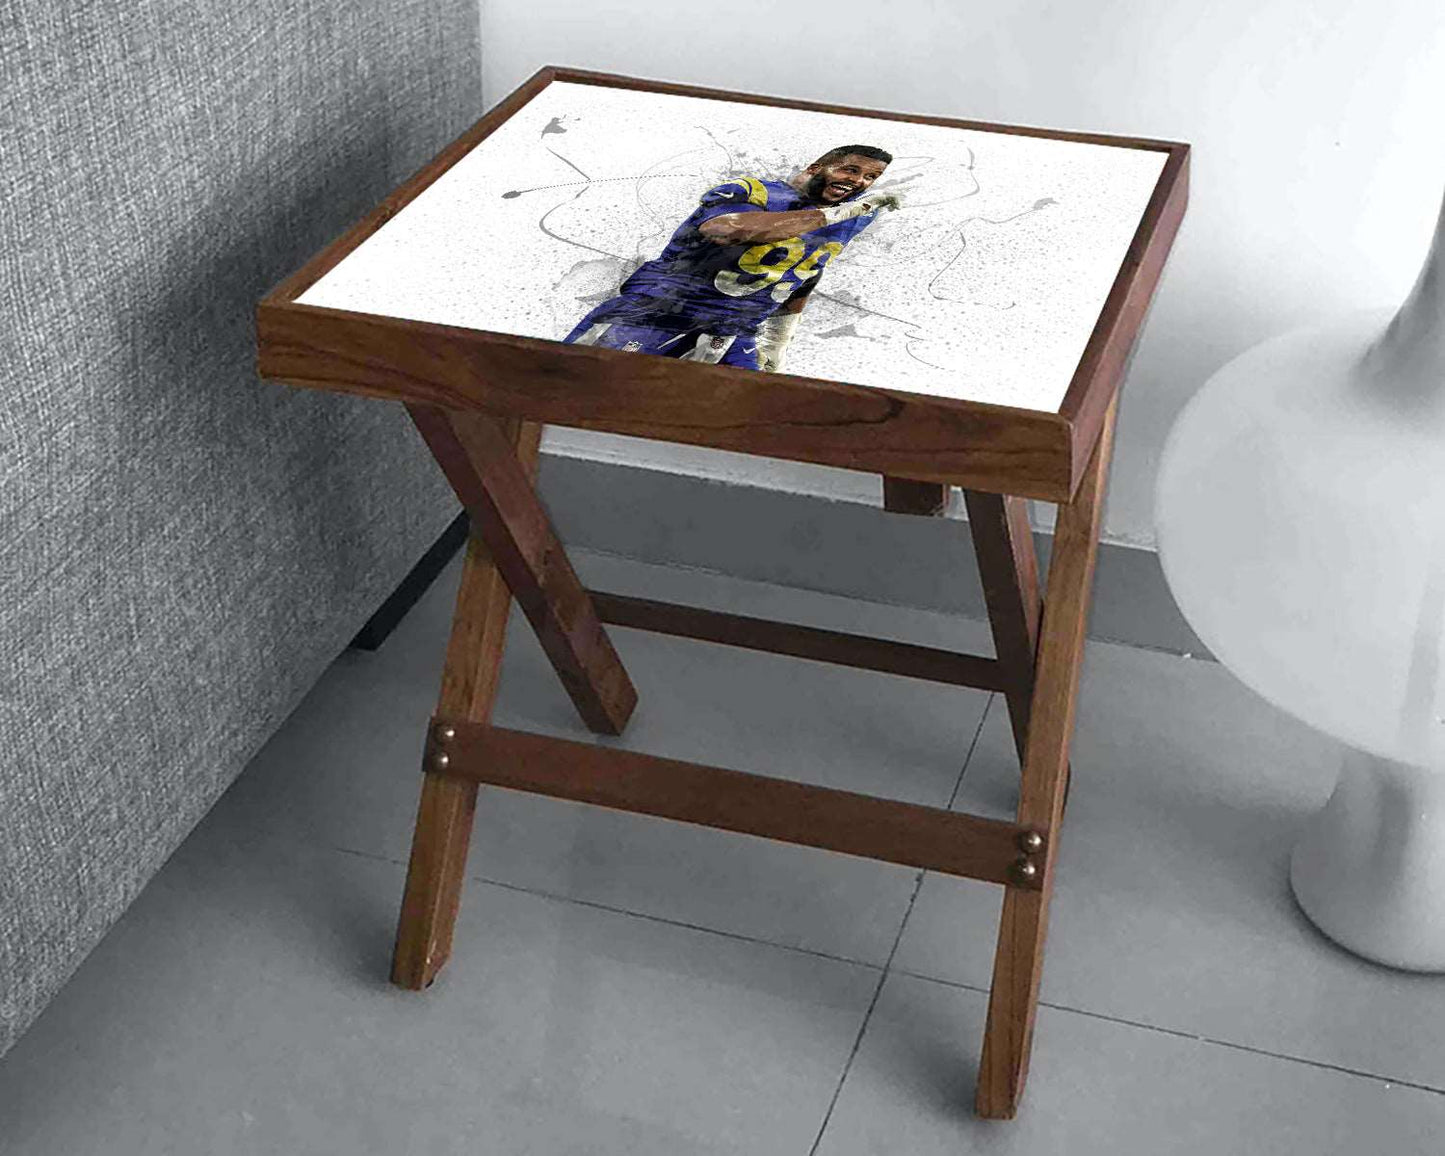 Aaron Donald Splash Effect Coffee and Laptop Table 